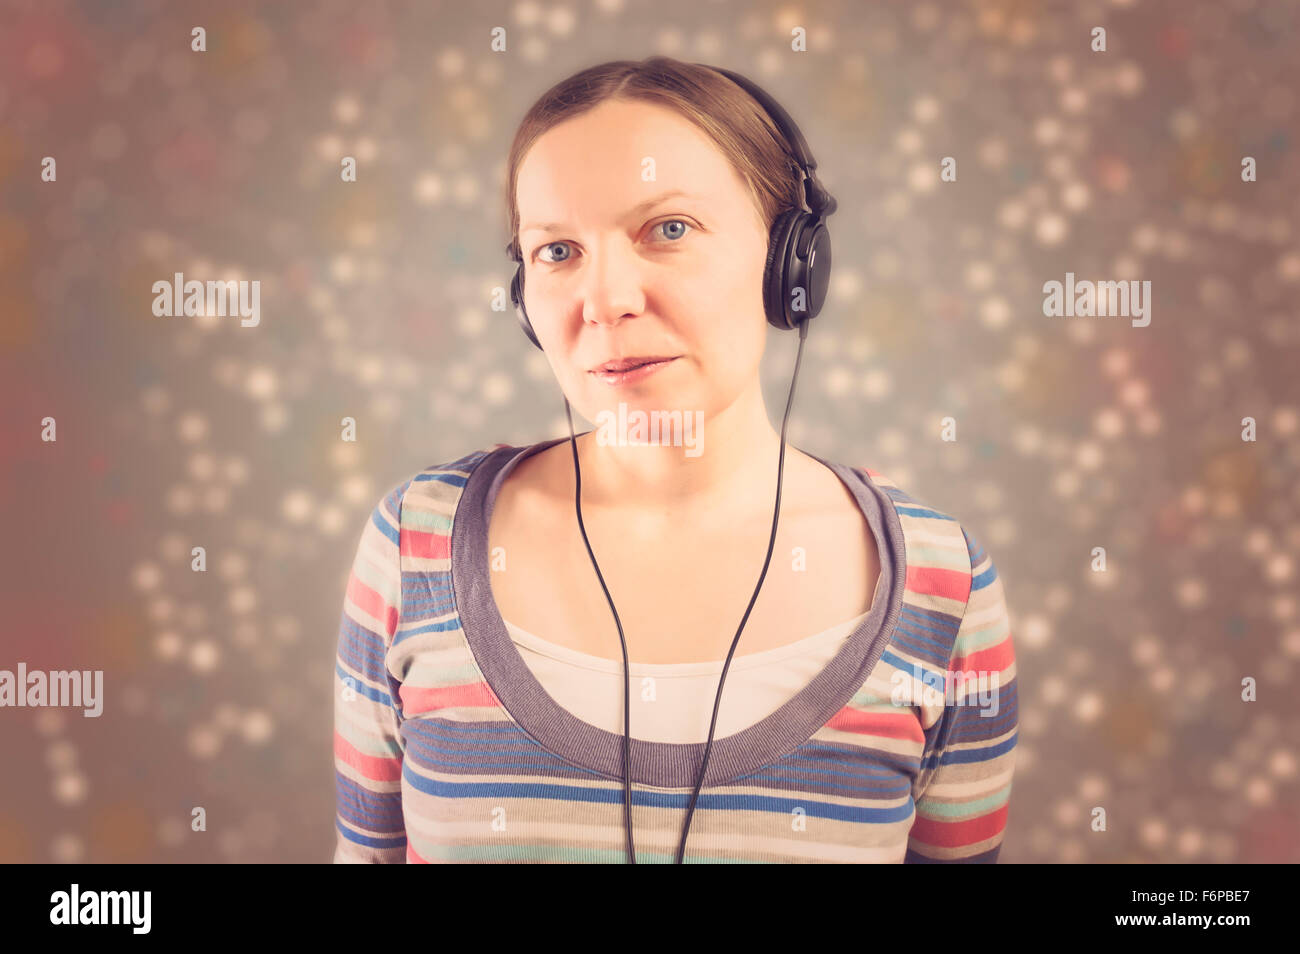 Portrait of a beautiful woman with headphones listening to music. Selective focus. Stock Photo